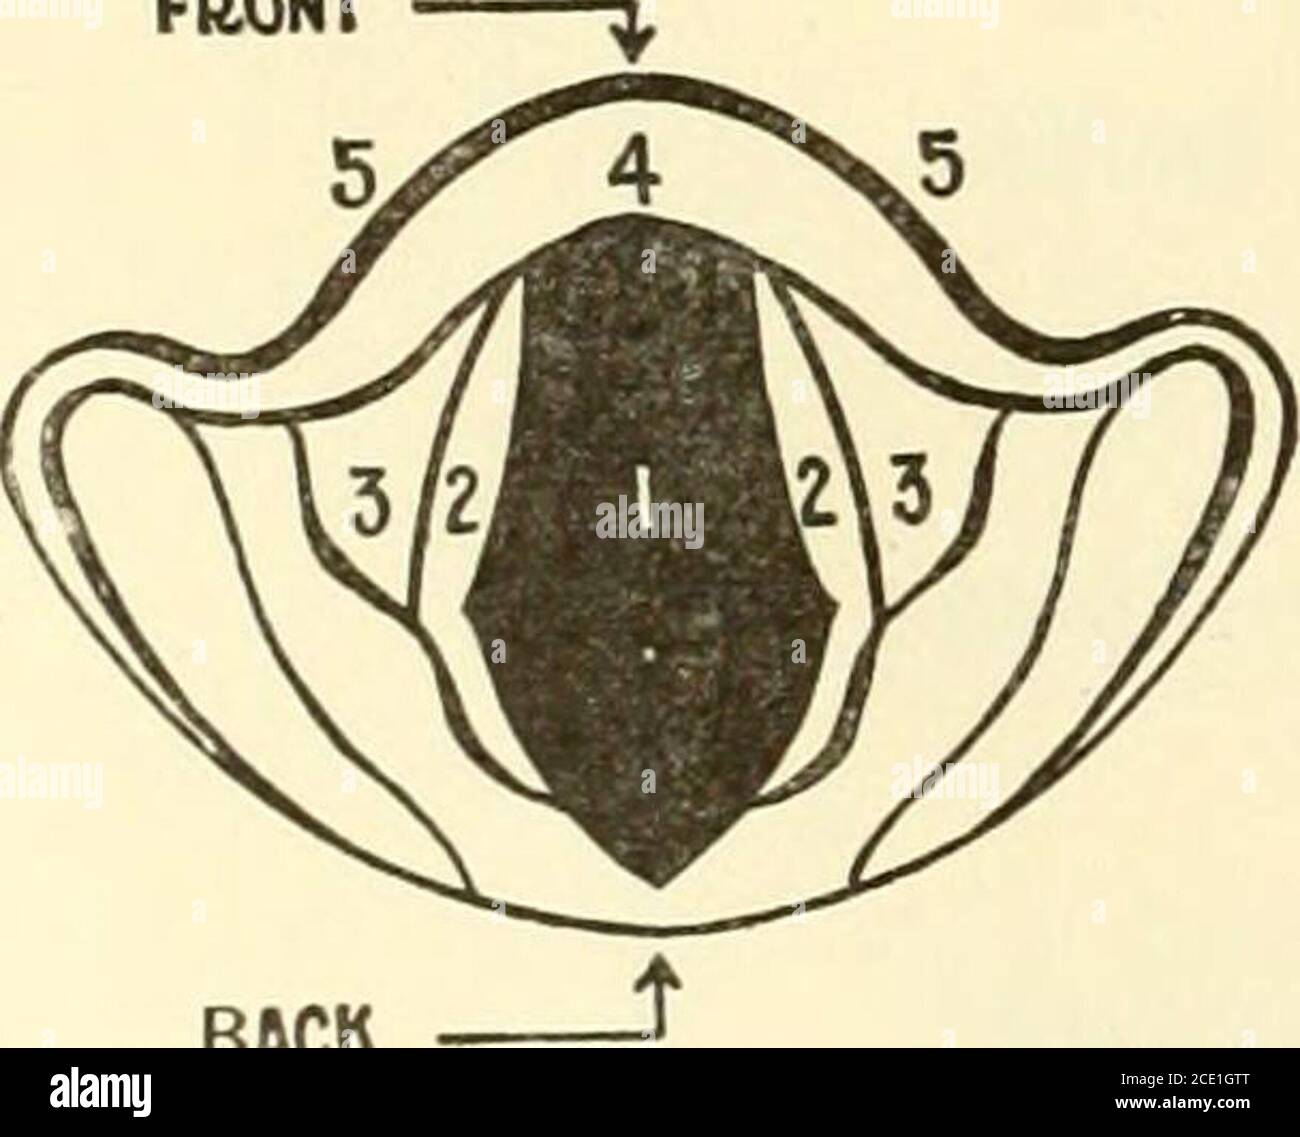 . Voice and song : a practical method for the study of singing . 12 The Nose. 11 The Nasal Cavities. 10 The Upper Pharynx. 9 The Hard Pa/ate. 8 The Uvula ) Shows the position when I shutting off the upper and r pharynx, and when sing- o jj. a » i I ™V a high note. See Soft Palate J pages 32 and 53. 7 The Mouth (The Oral Cavity J. 6 The Tongue. 5 The Teeth. 4 The Lips. 3 The Lower Pharynx. 2 The Epiglottis. 1 f Within the larynx IsI shown the entrance to The Larvnx J tne leff ventricle &gt;inp. Larynx. &lt; oetween the edges 0f I the False (FC) and the True (TC^) Vocal Cords A Arytenoid Carti Stock Photo